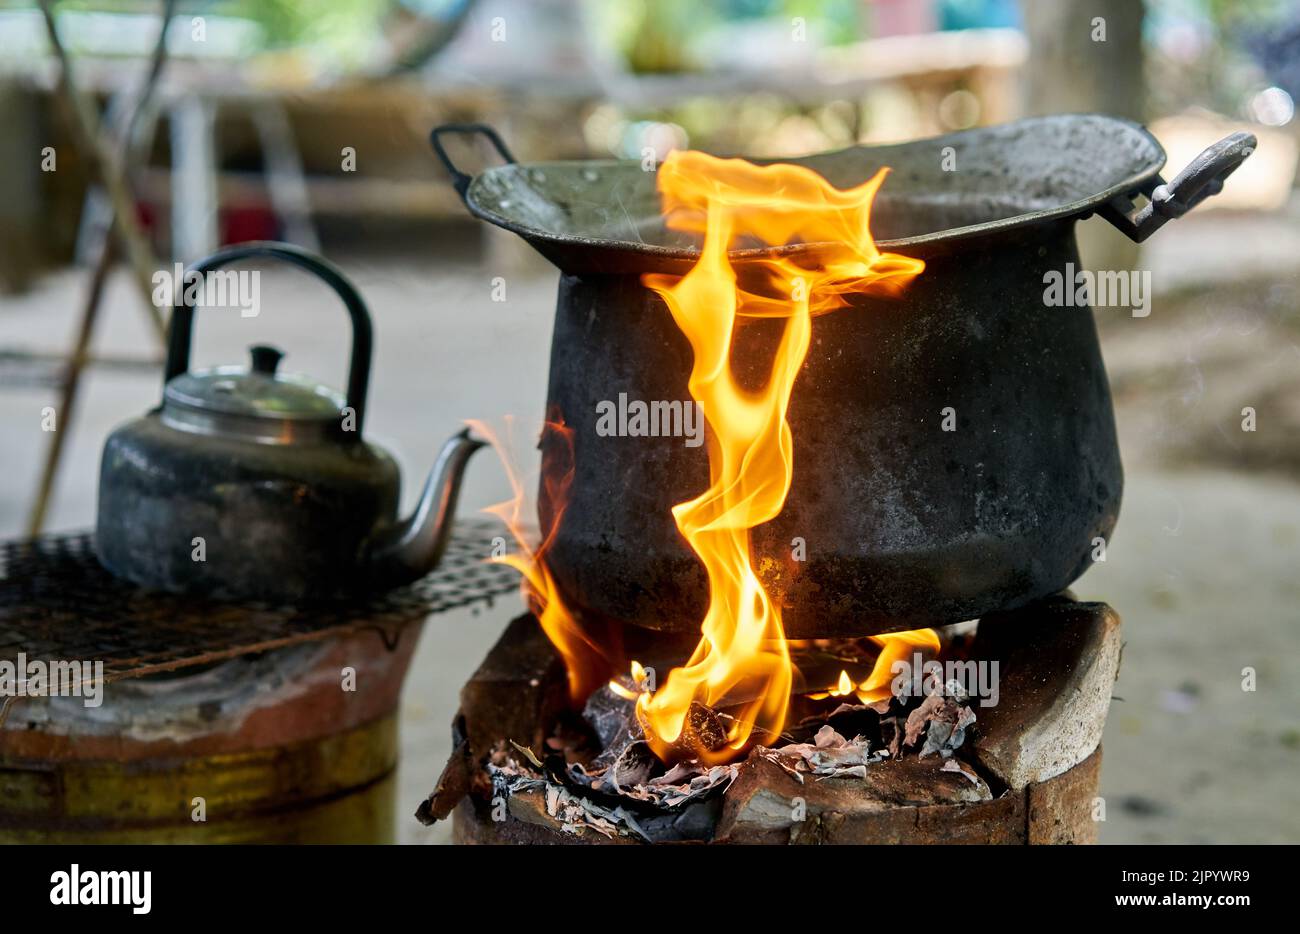 A big black pot and old kettle on an outdoor fire. Stock Photo